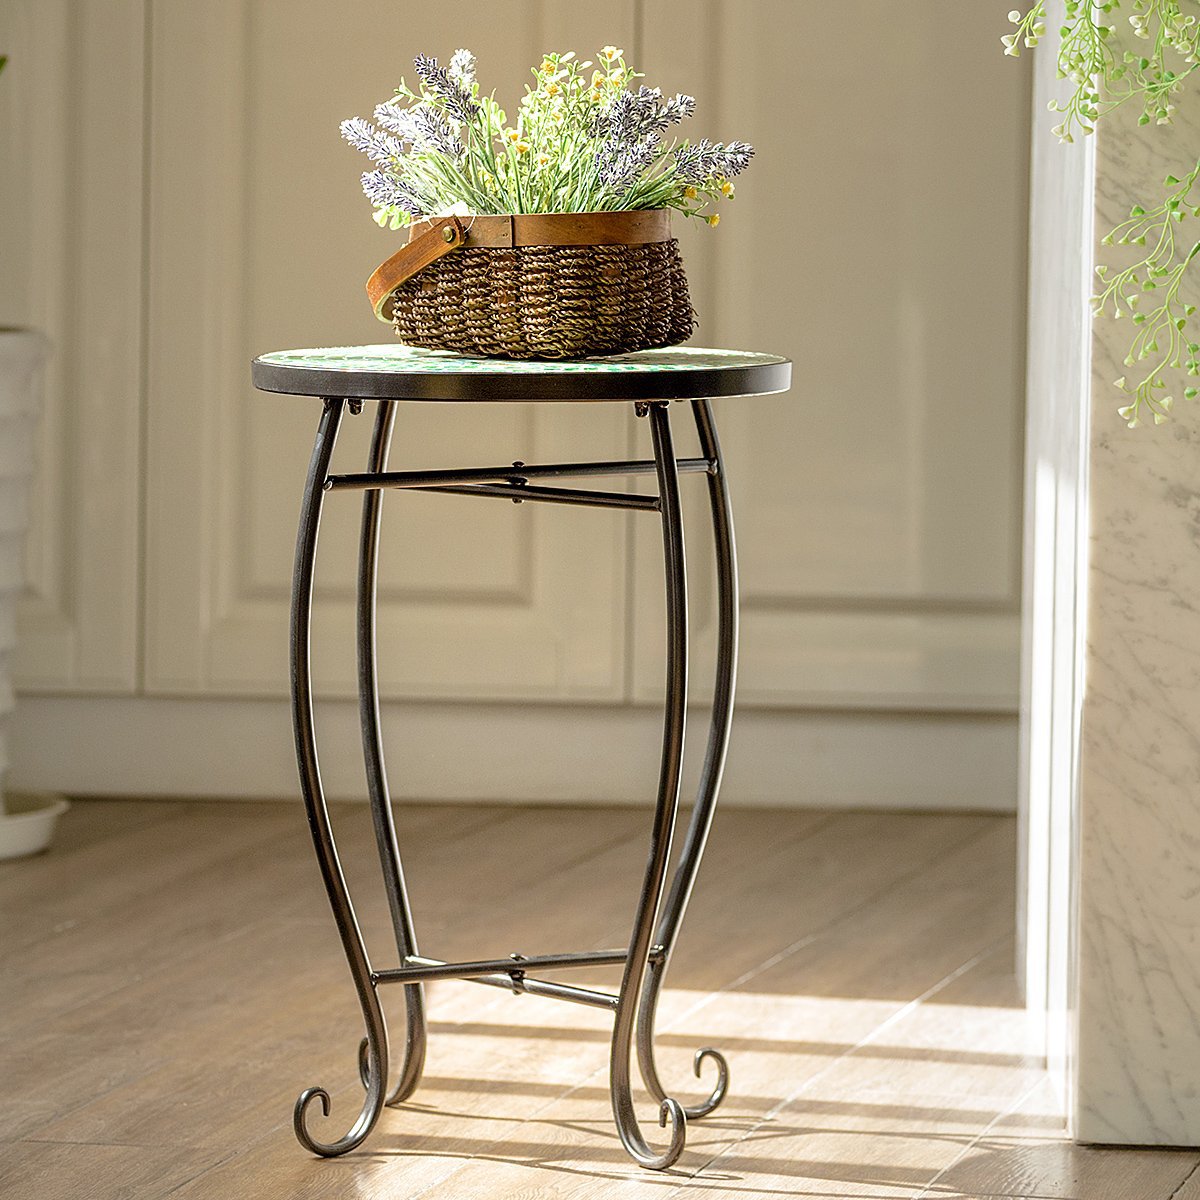 Accent Table Coffee Tables Decor Accent Side End Tables Plant Stand Chair for Bedroom, Living Room, Home Office and Patio - image 4 of 11